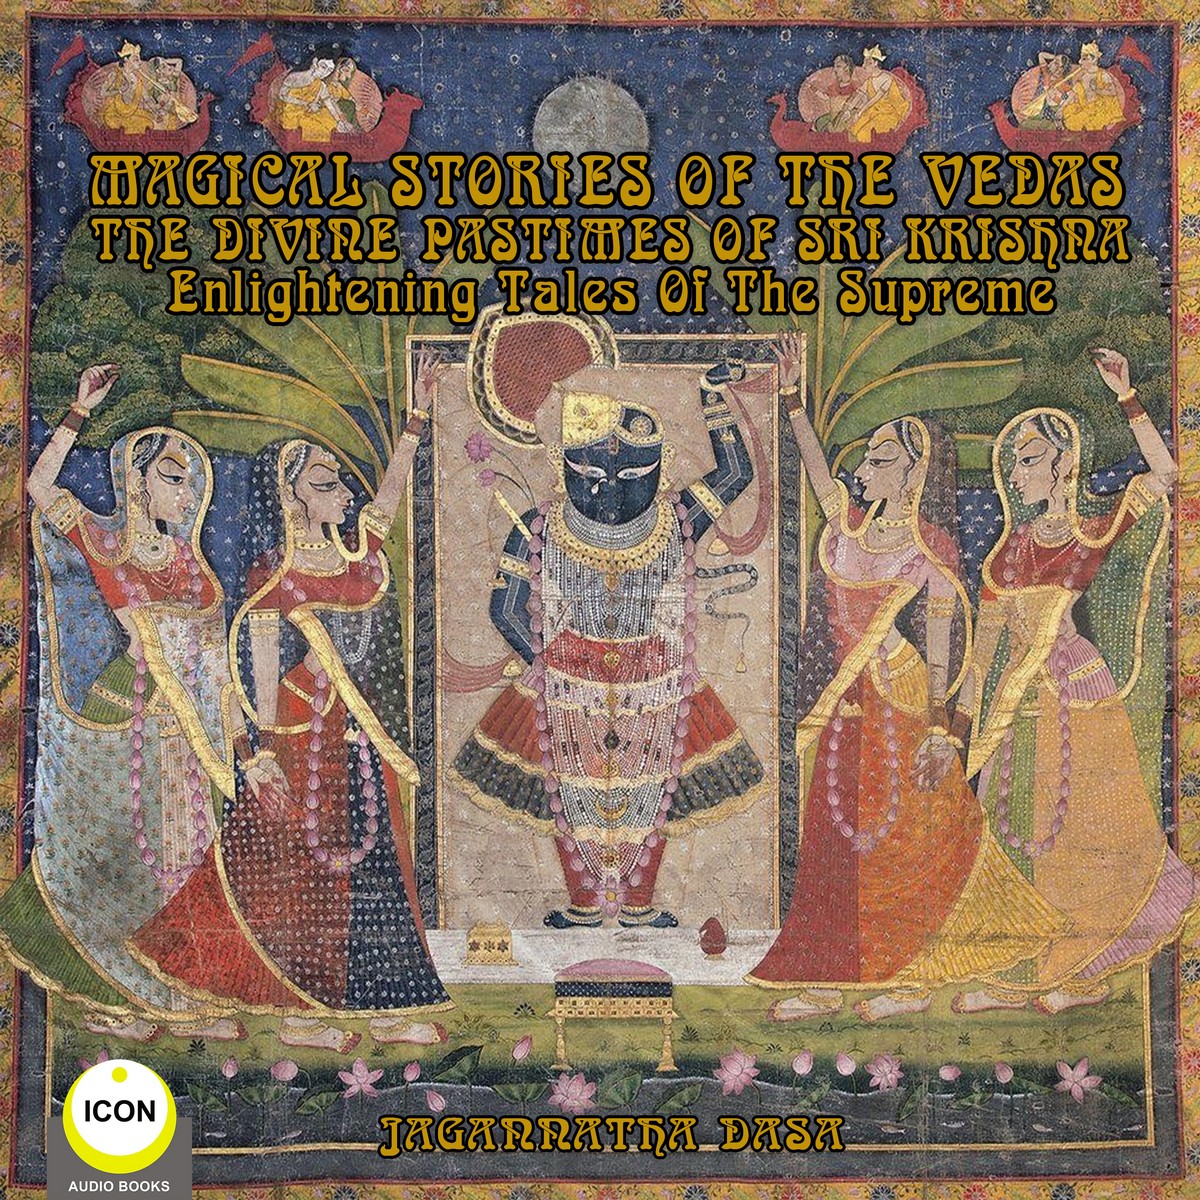 Magical Stories of The Vedas The Divine Pastimes of Sri Krishna – Enlightening Tales of the Supreme